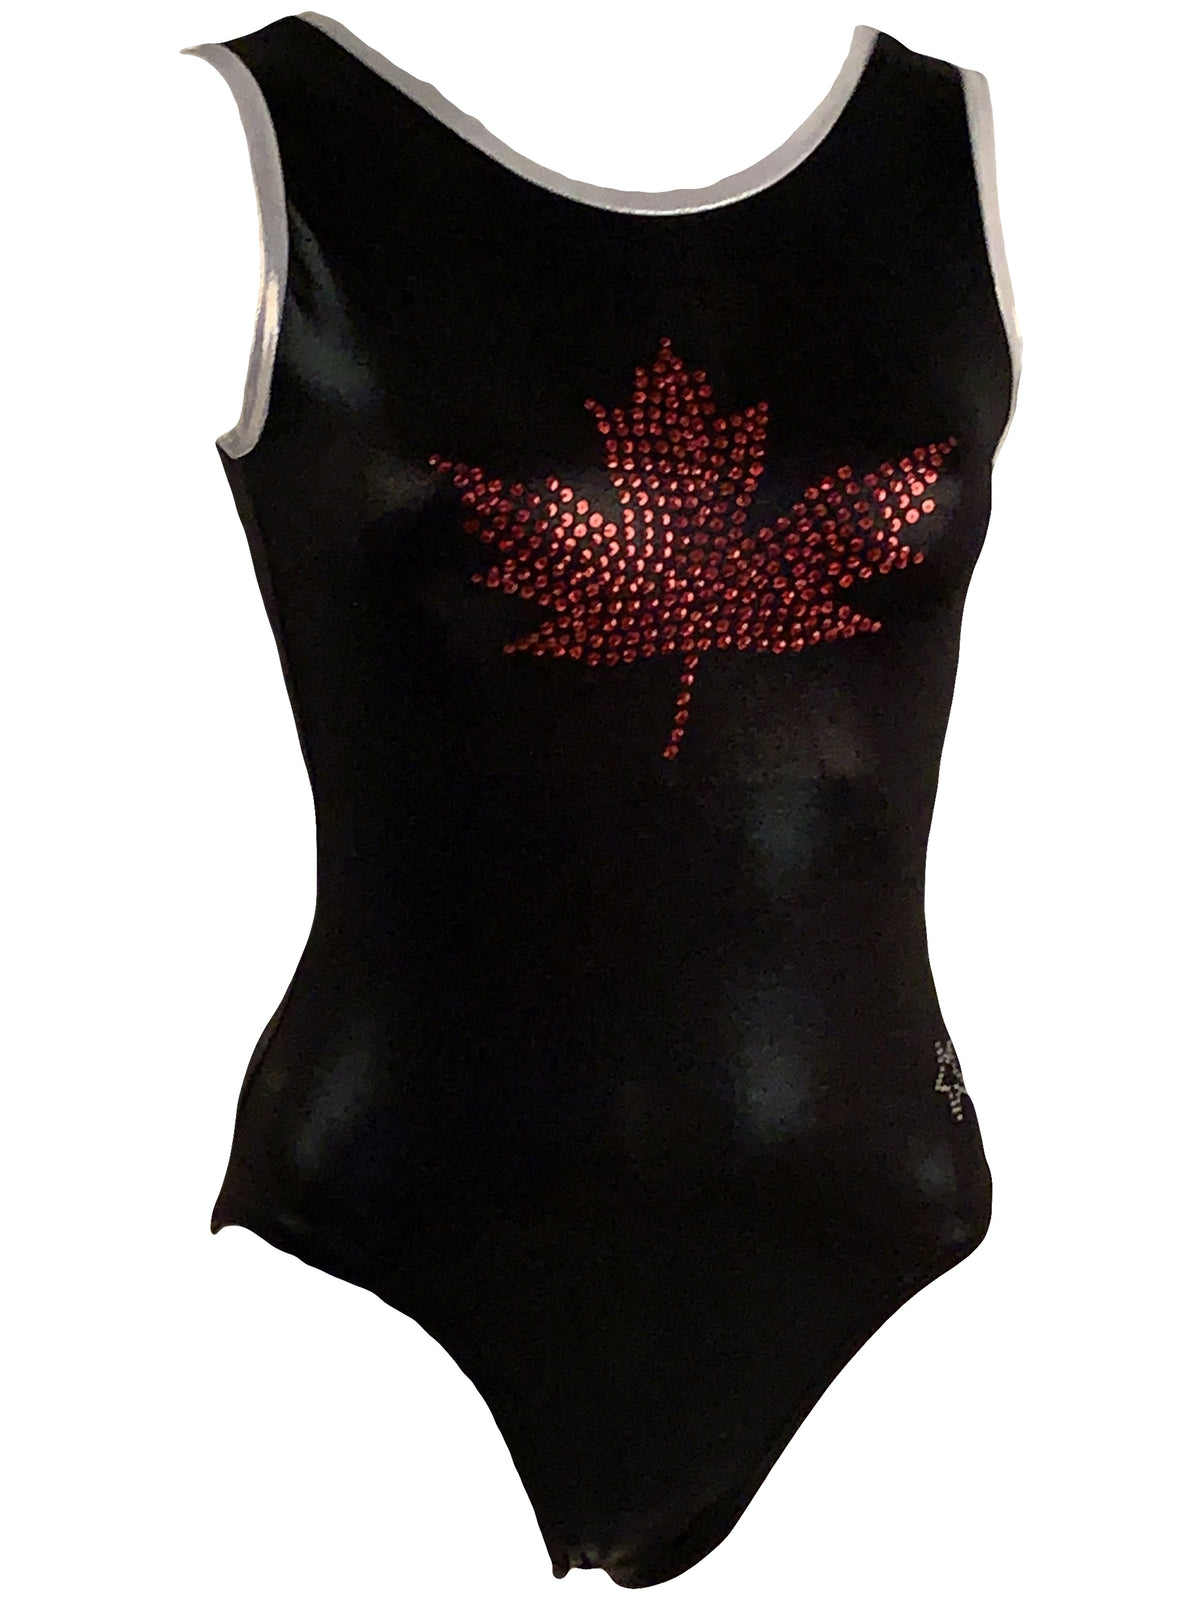 Black leotard with red maple leaf  in sequins on front upper chest